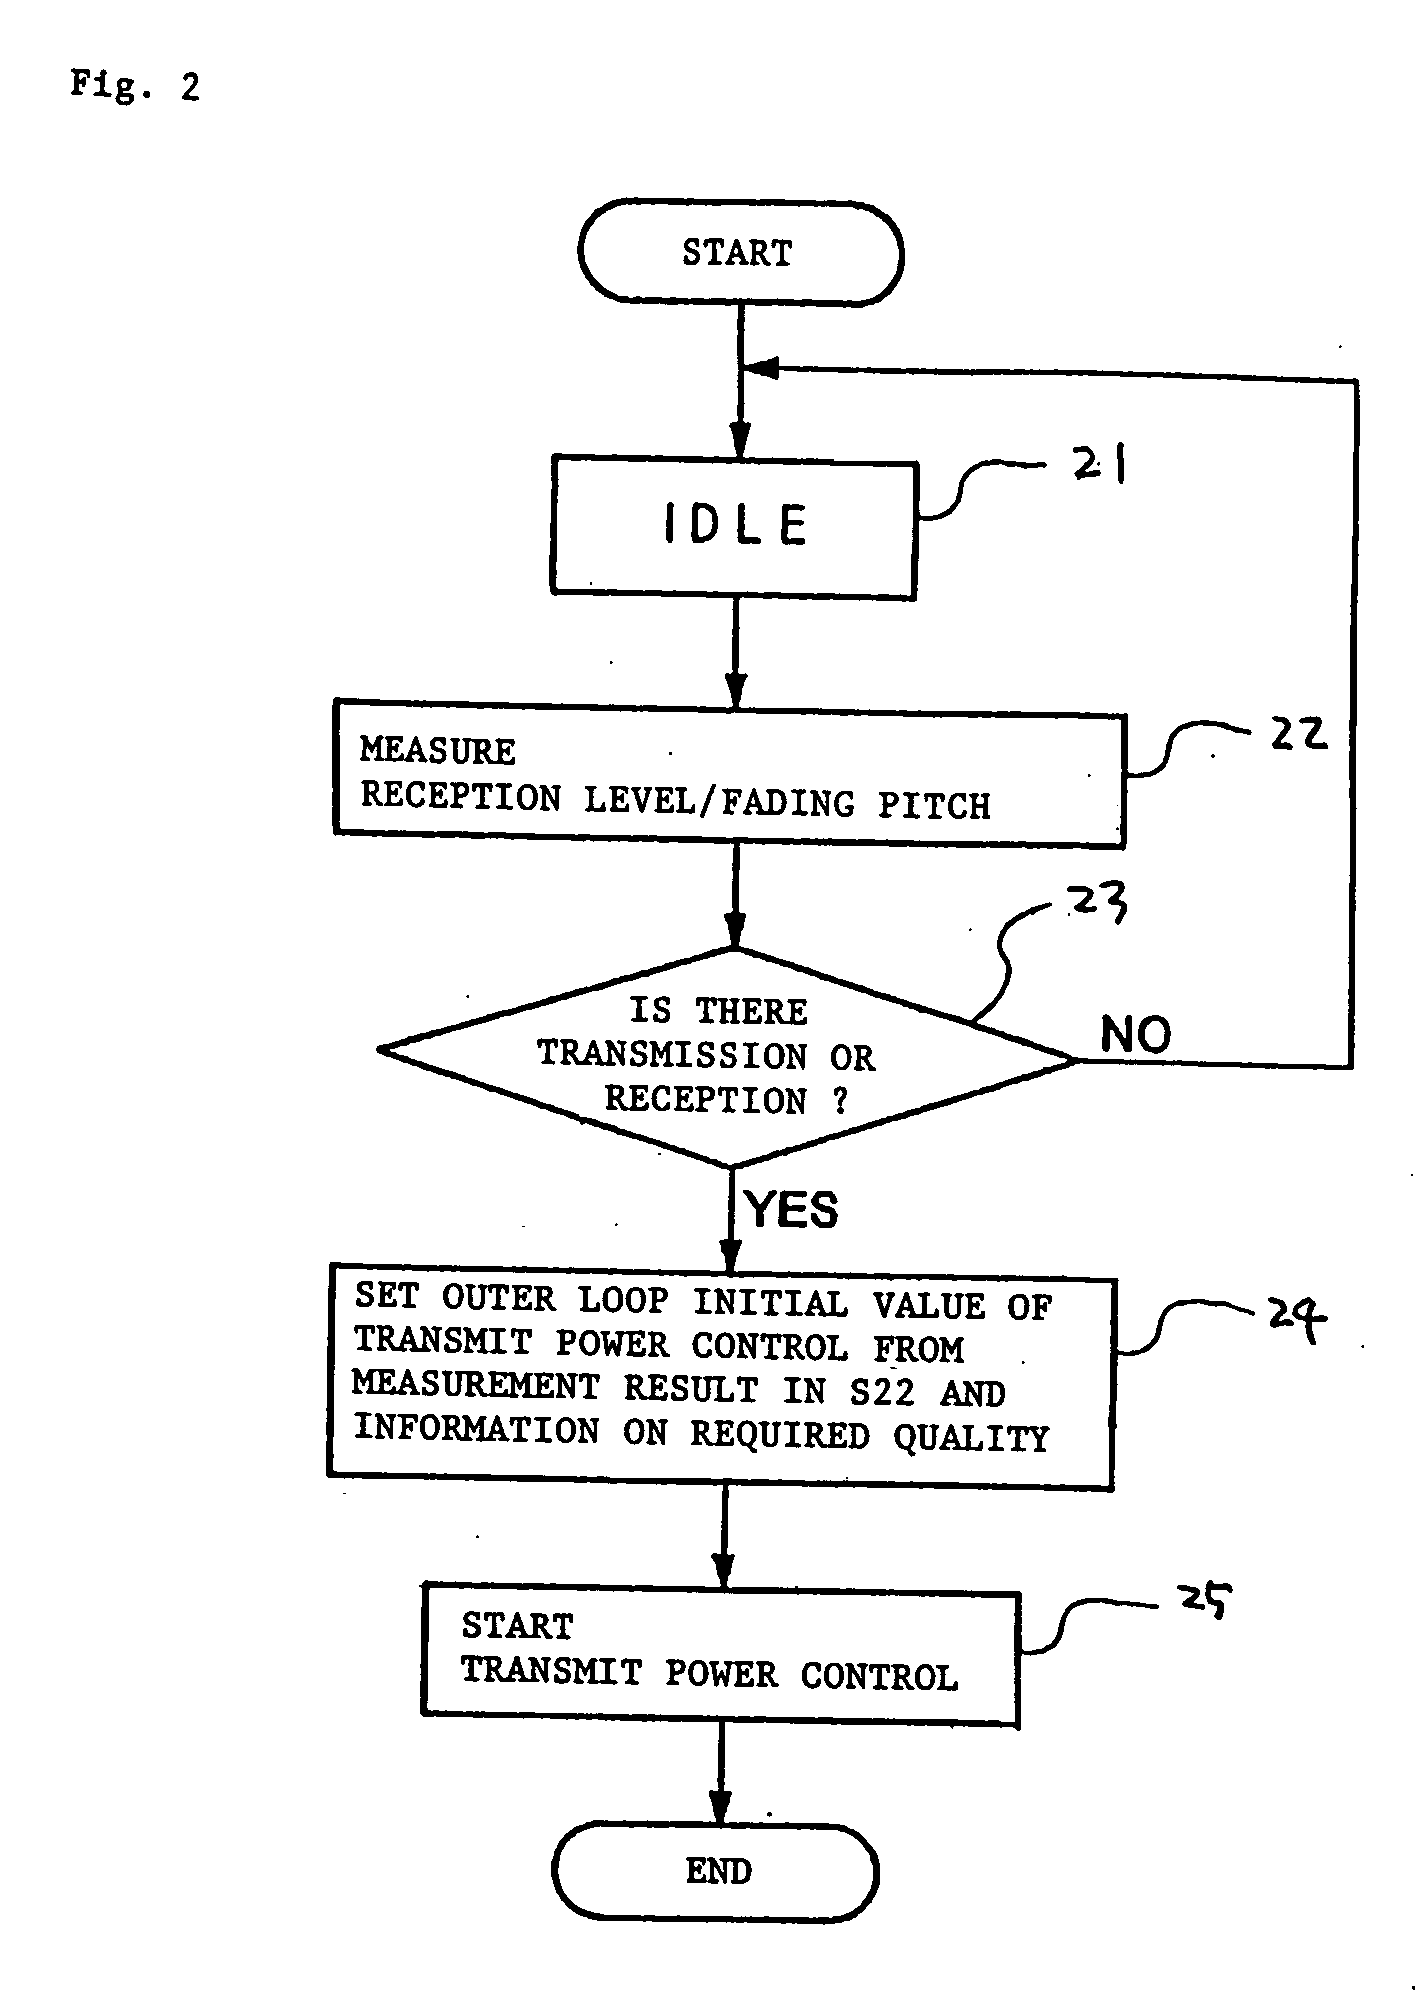 Reduction of power consumption and interference power in transmit power control system